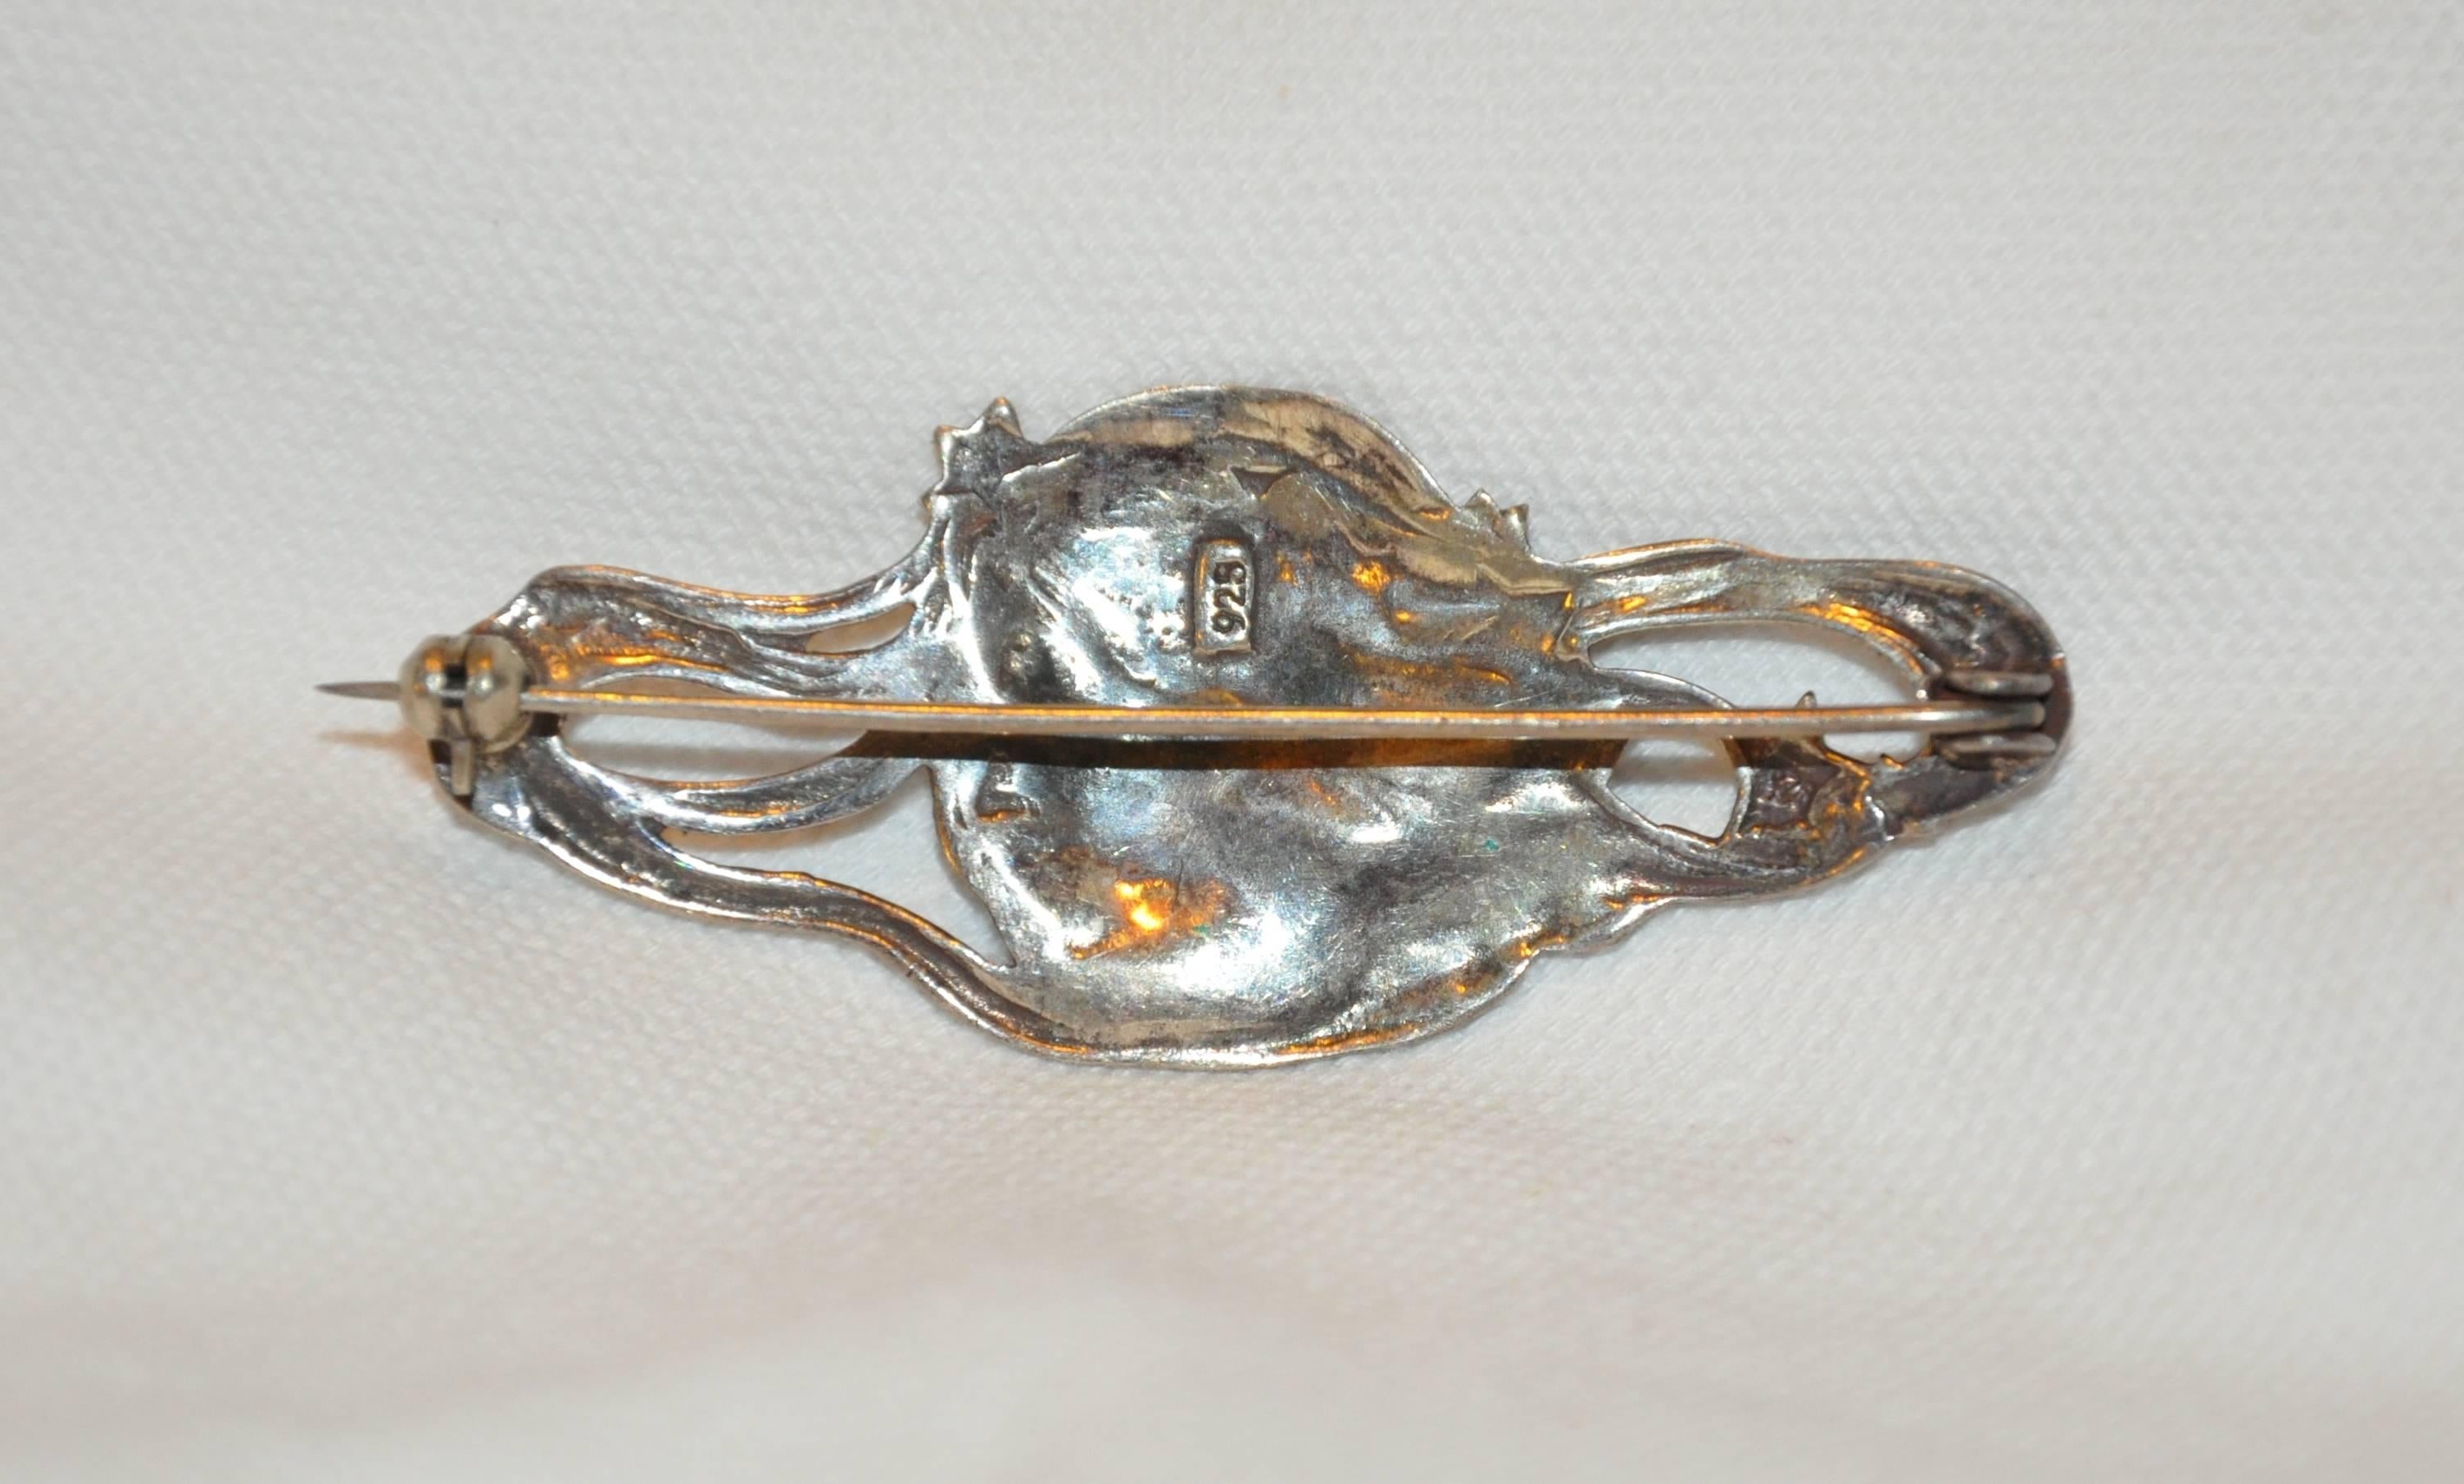        This wonderfully elegant Art Nouveau 925 sterling "Lady & Stars" brooch is accented with detailed etching of swirls surrounding the lady and stars. The width measures 2 1/2 inches, length measures 1 inch, depth is 3/8 inch, made